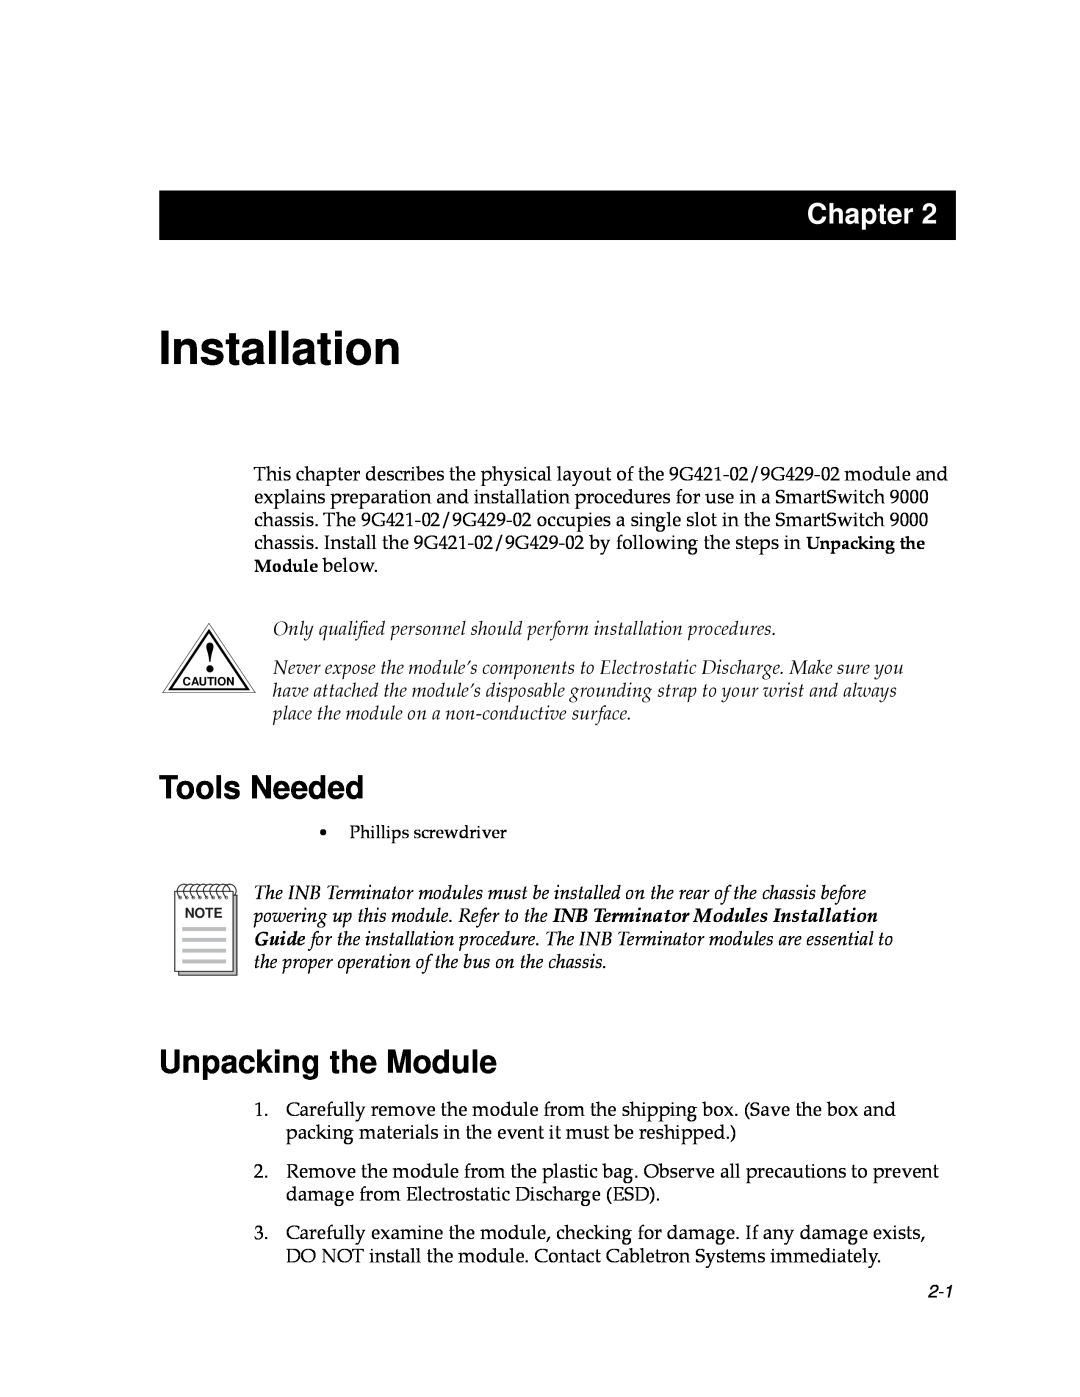 Cabletron Systems 9000 manual Installation, Tools Needed, Unpacking the Module, Chapter 